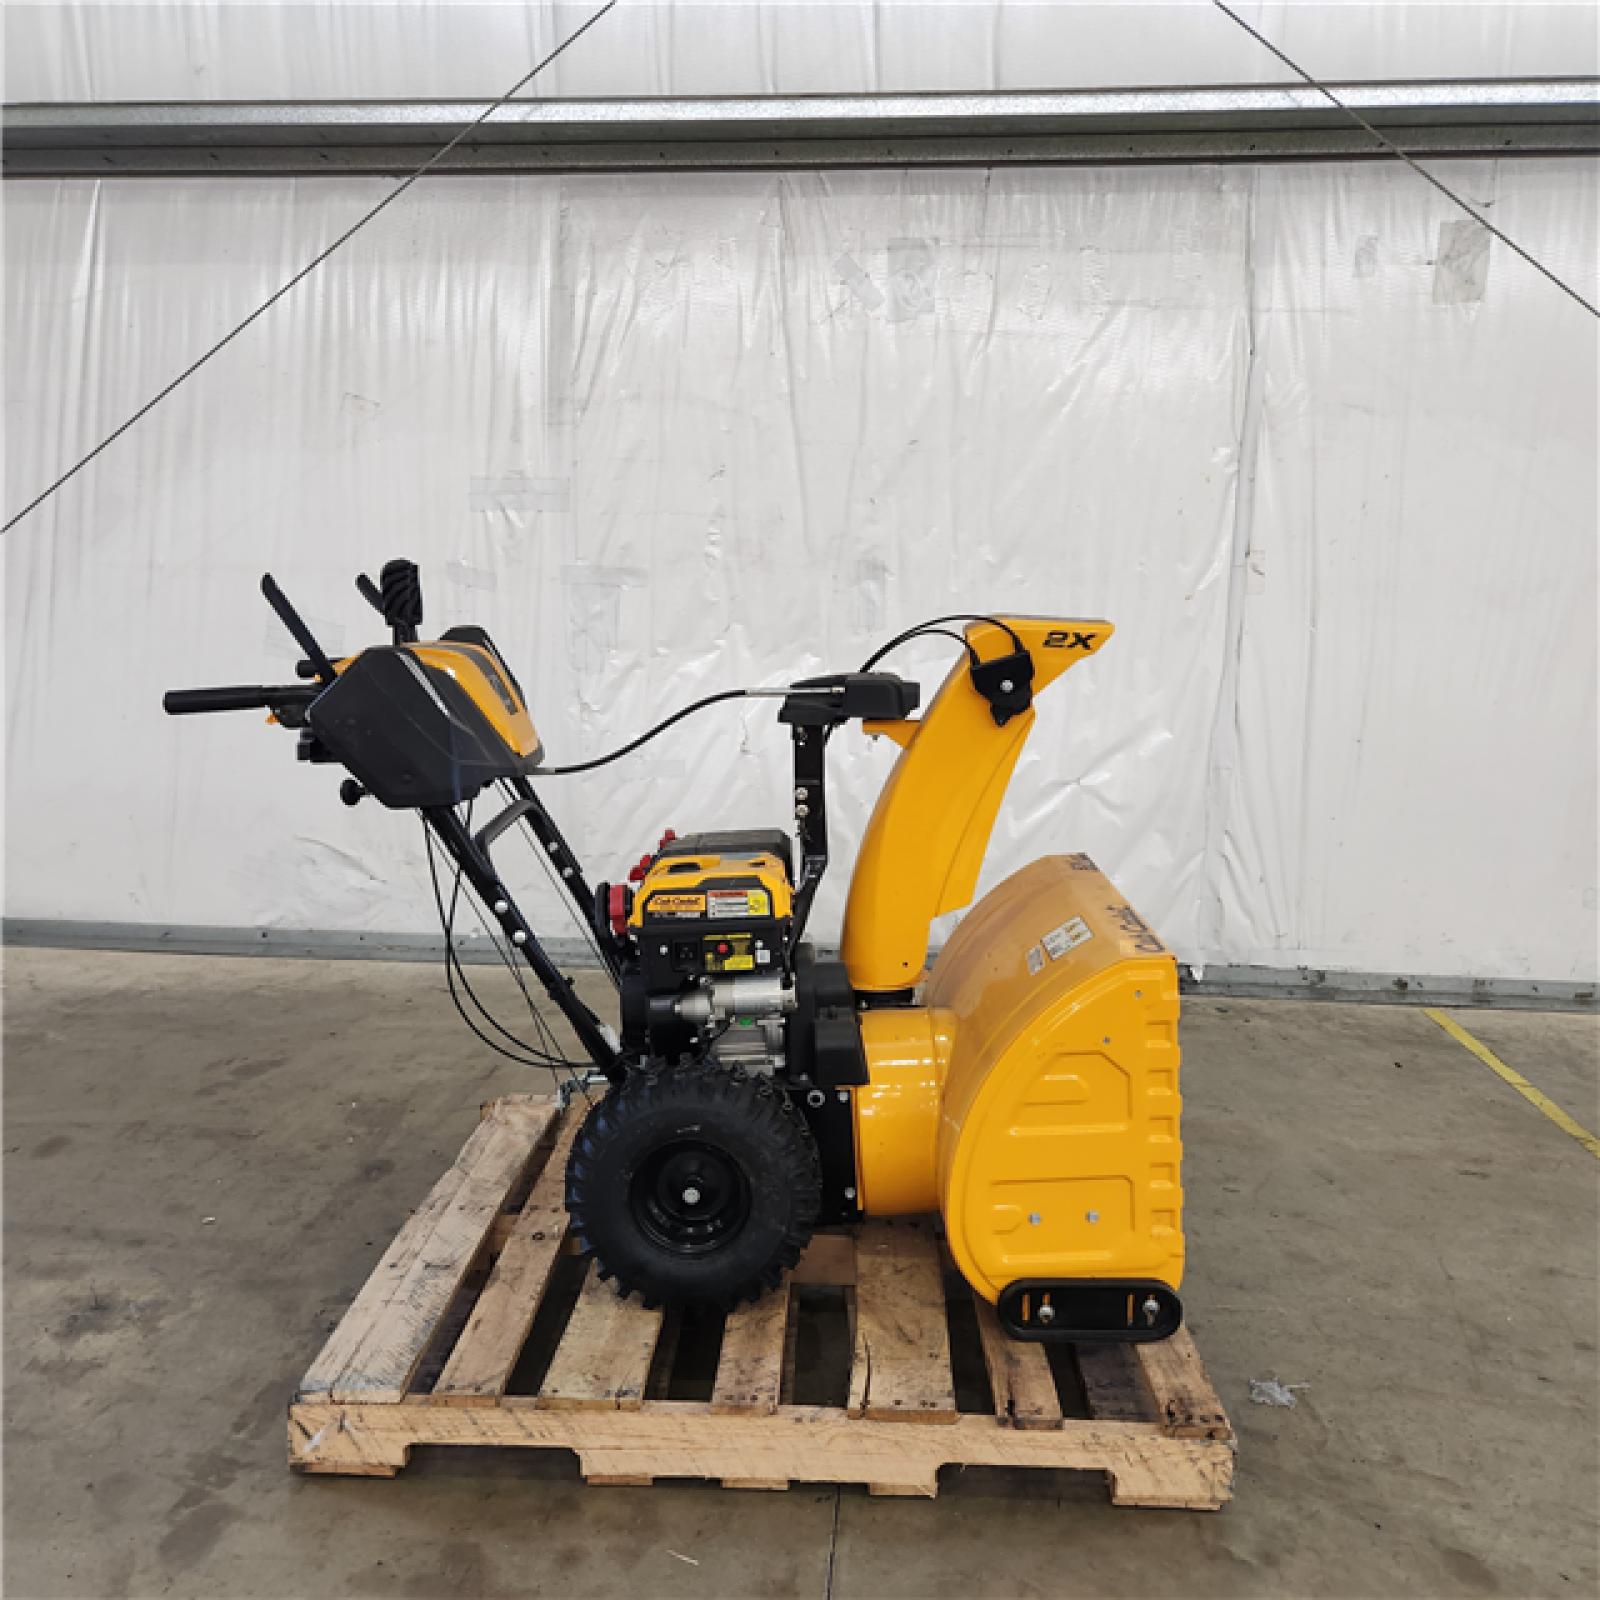 Houston Location - AS-IS Cub Cadet 2x 26'' in Snow Blower